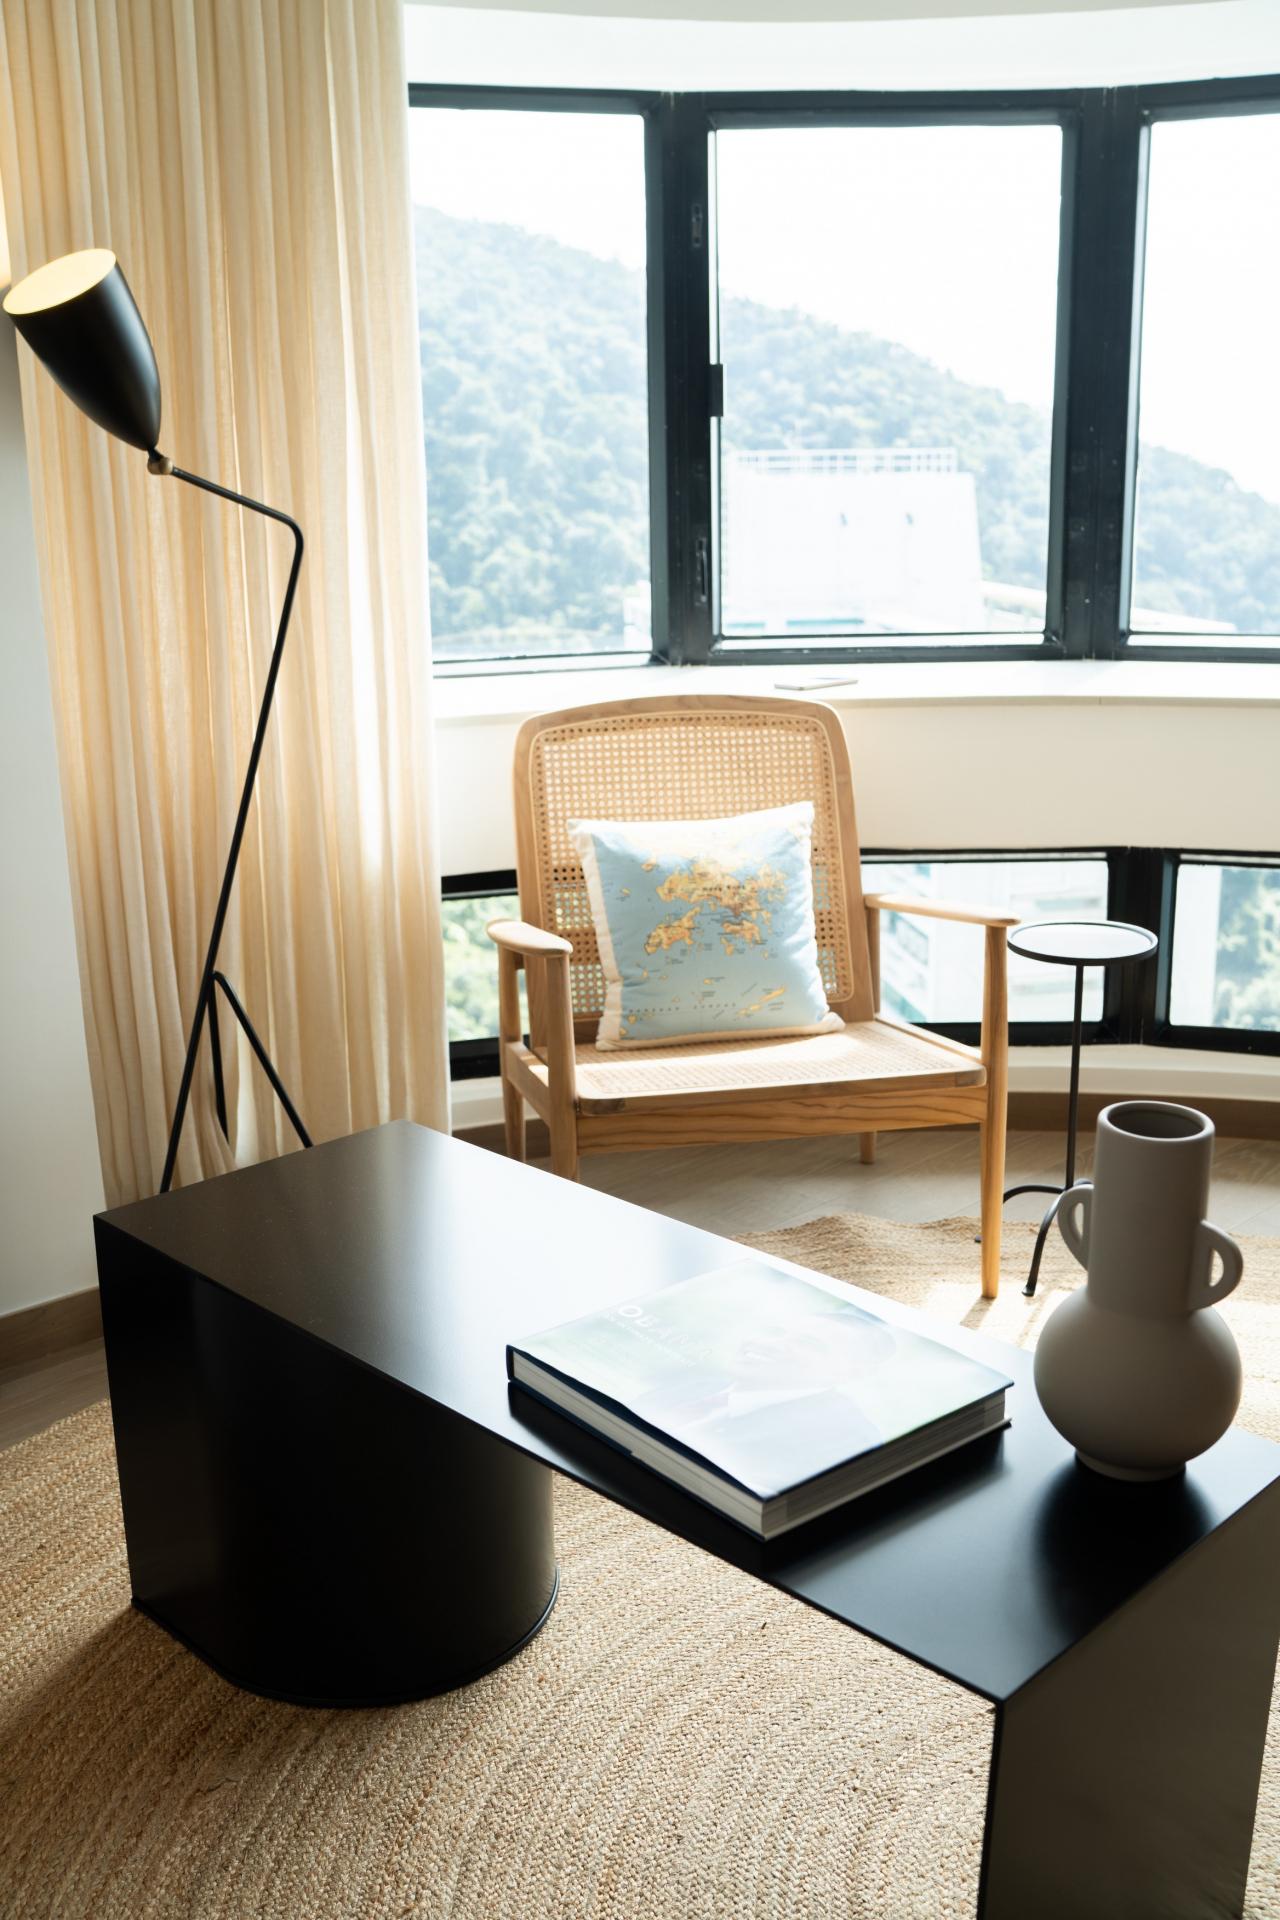  Win Key Workshop creates a 848 sq. ft. Scandi-style, light-drenched apartment for two in Repulse Bay